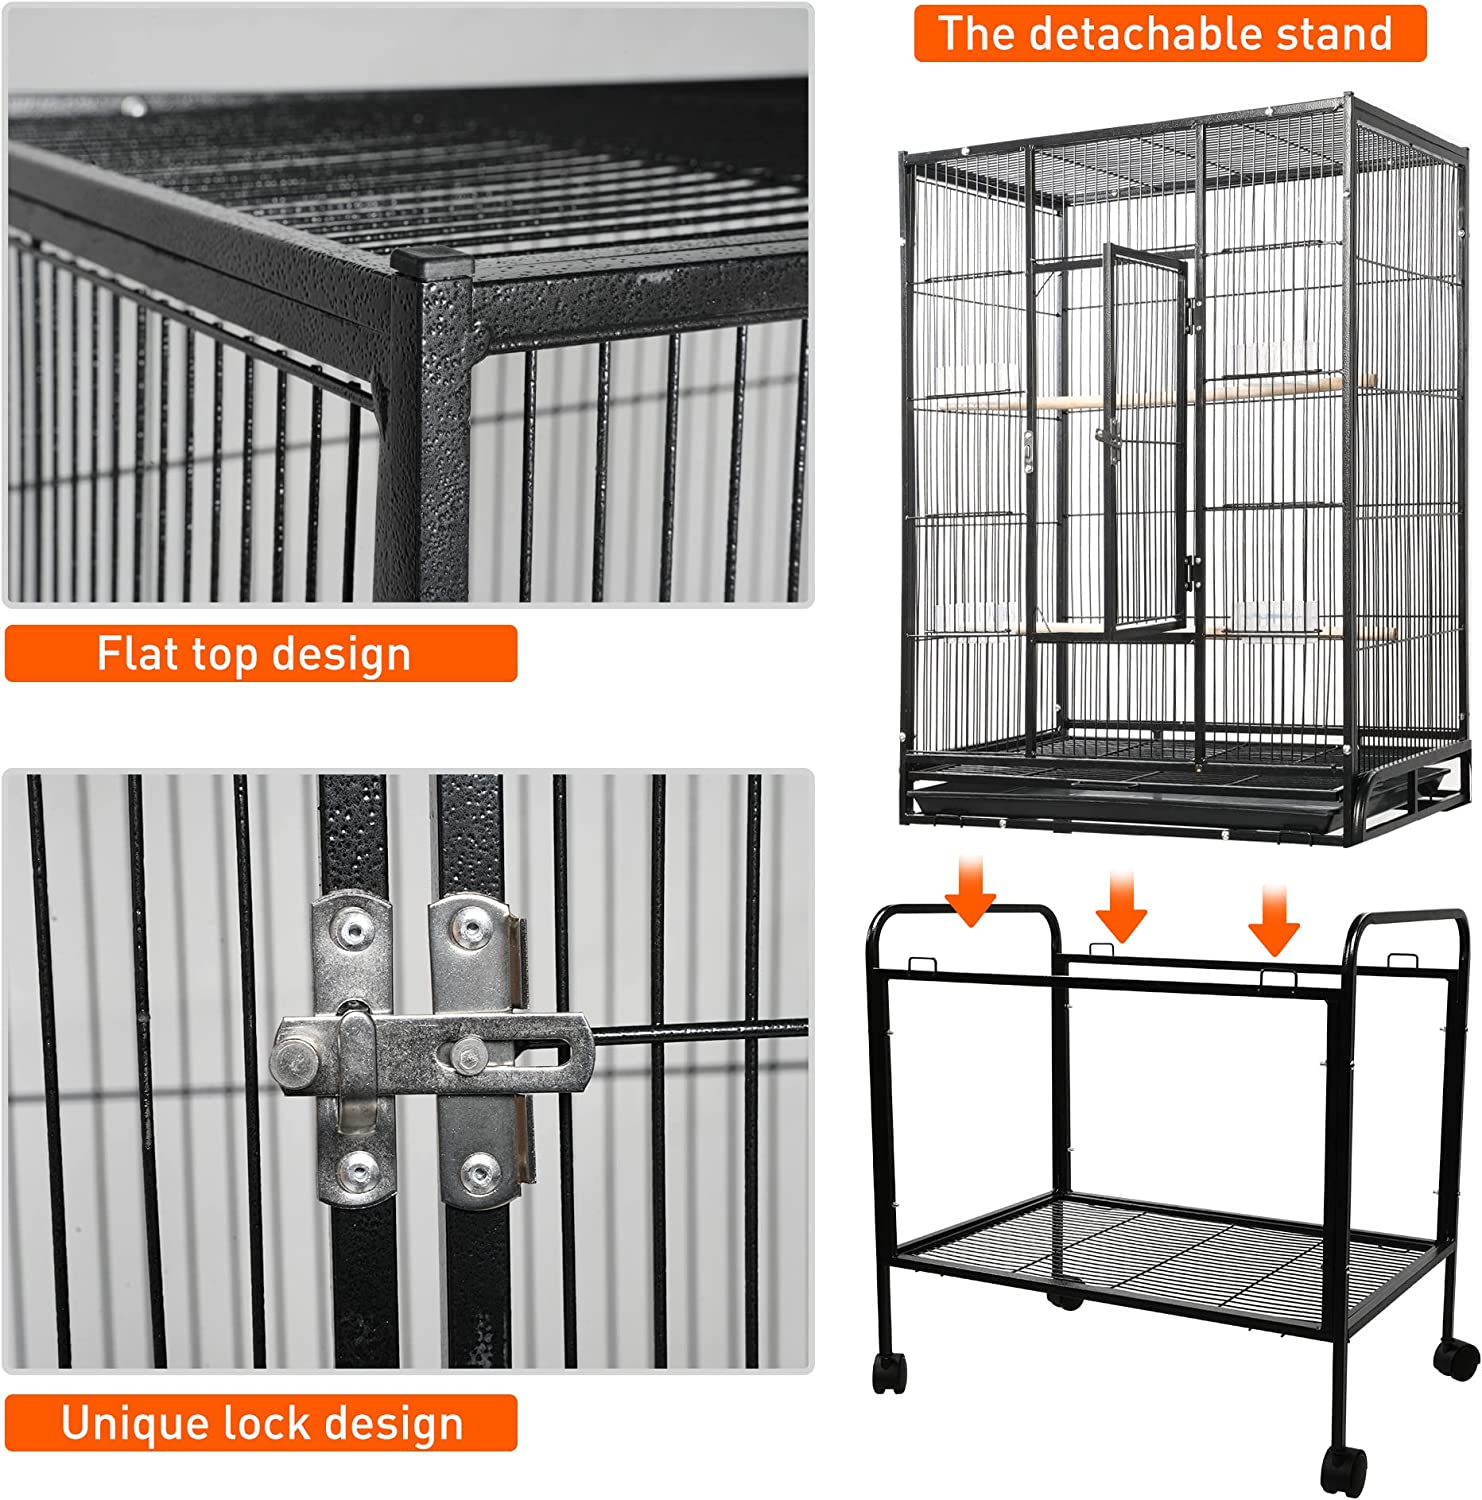 53 Inch Bird Cage with Rolling Stand & Storage Shelf, Large Iron Parrot Cage for Cockatiel, Conure, Lovebird, Parakeets